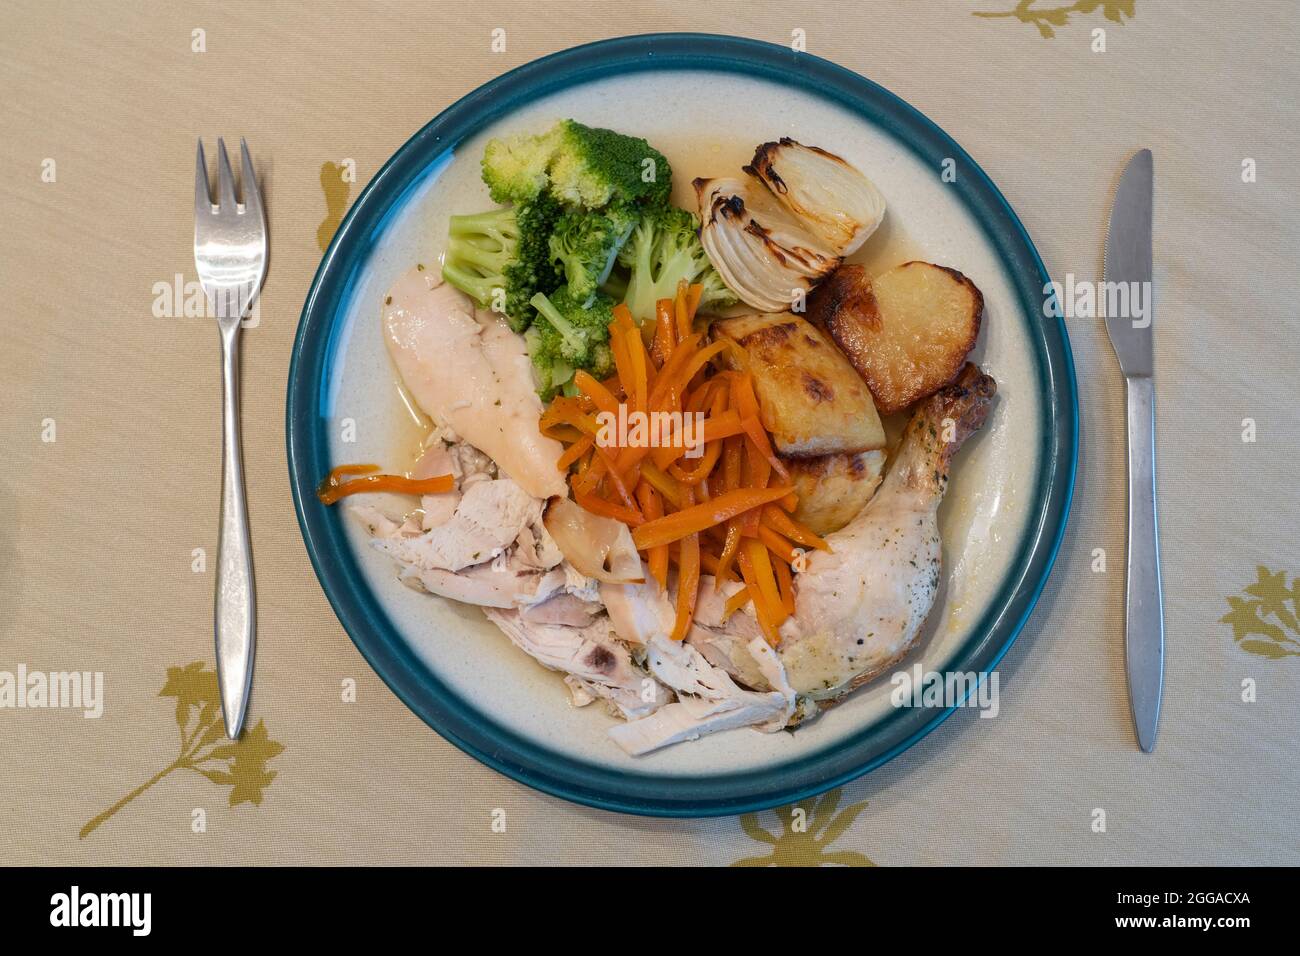 A vertical view looking down on a typical English Sunday roast dinner with roast chicken, roasted onions and vegetables on a china plate with cutlery Stock Photo